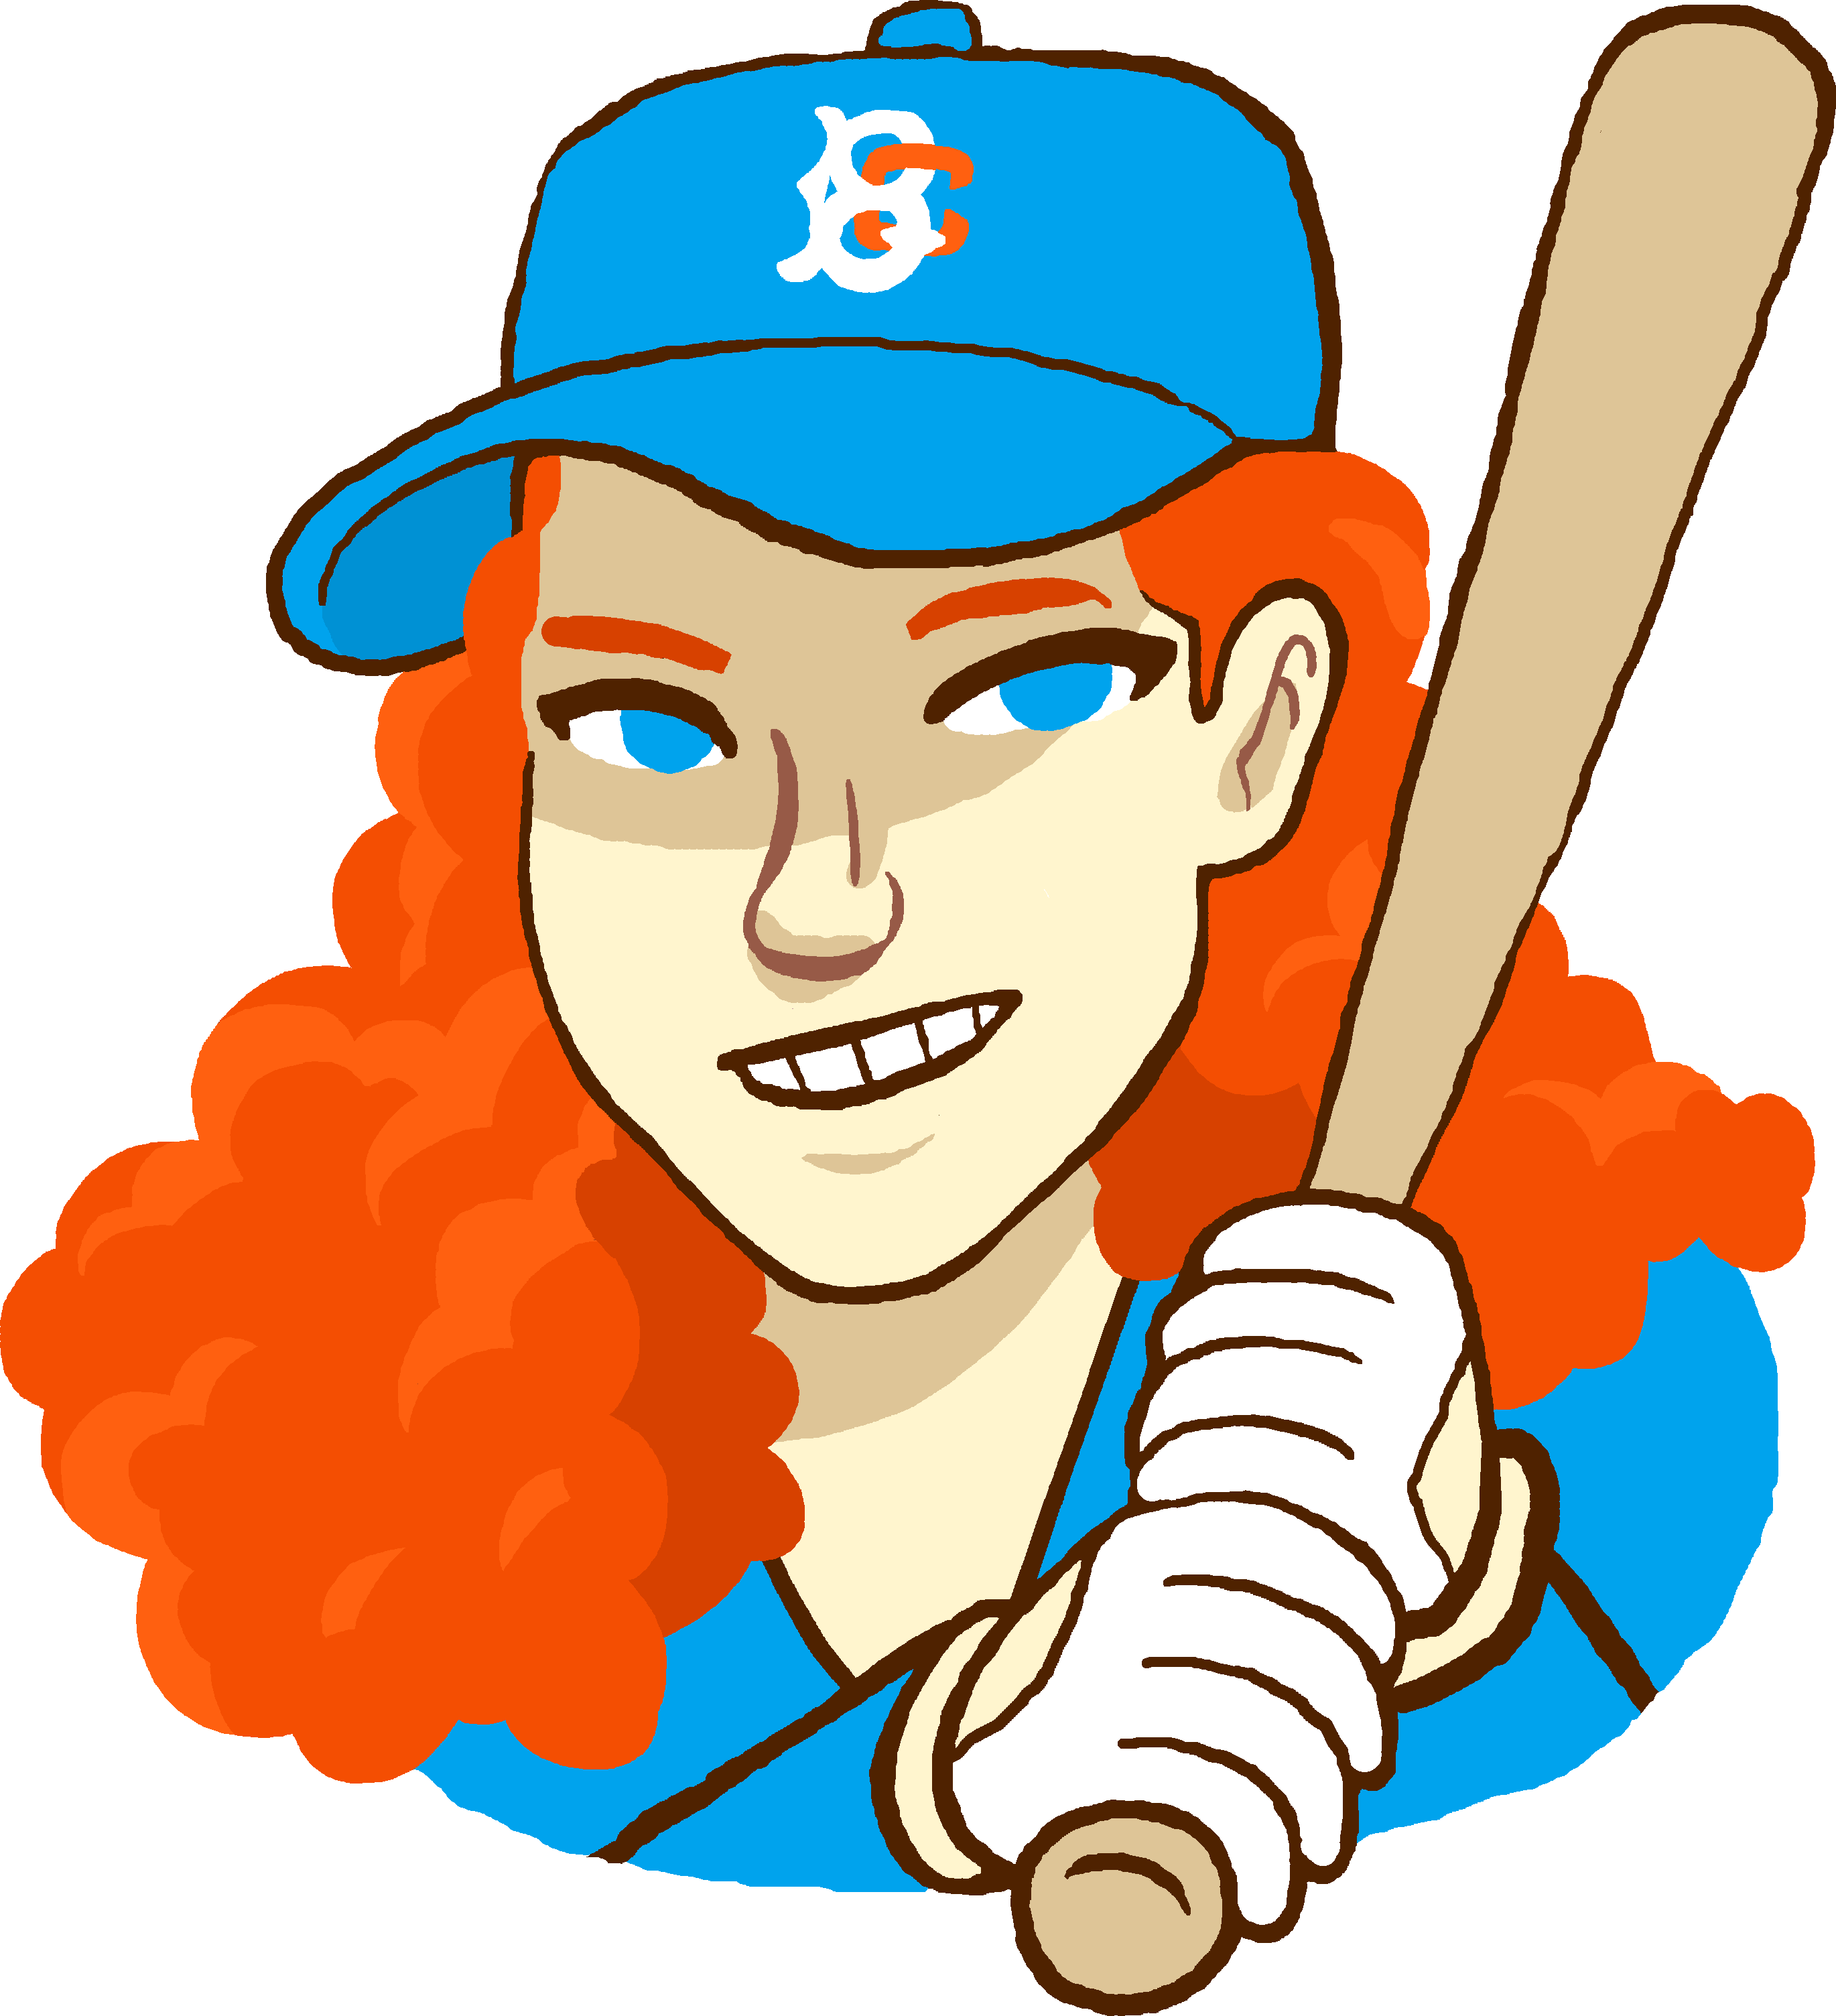 This is a cartoon version of woman wearing a baseball hat and holding a bat.